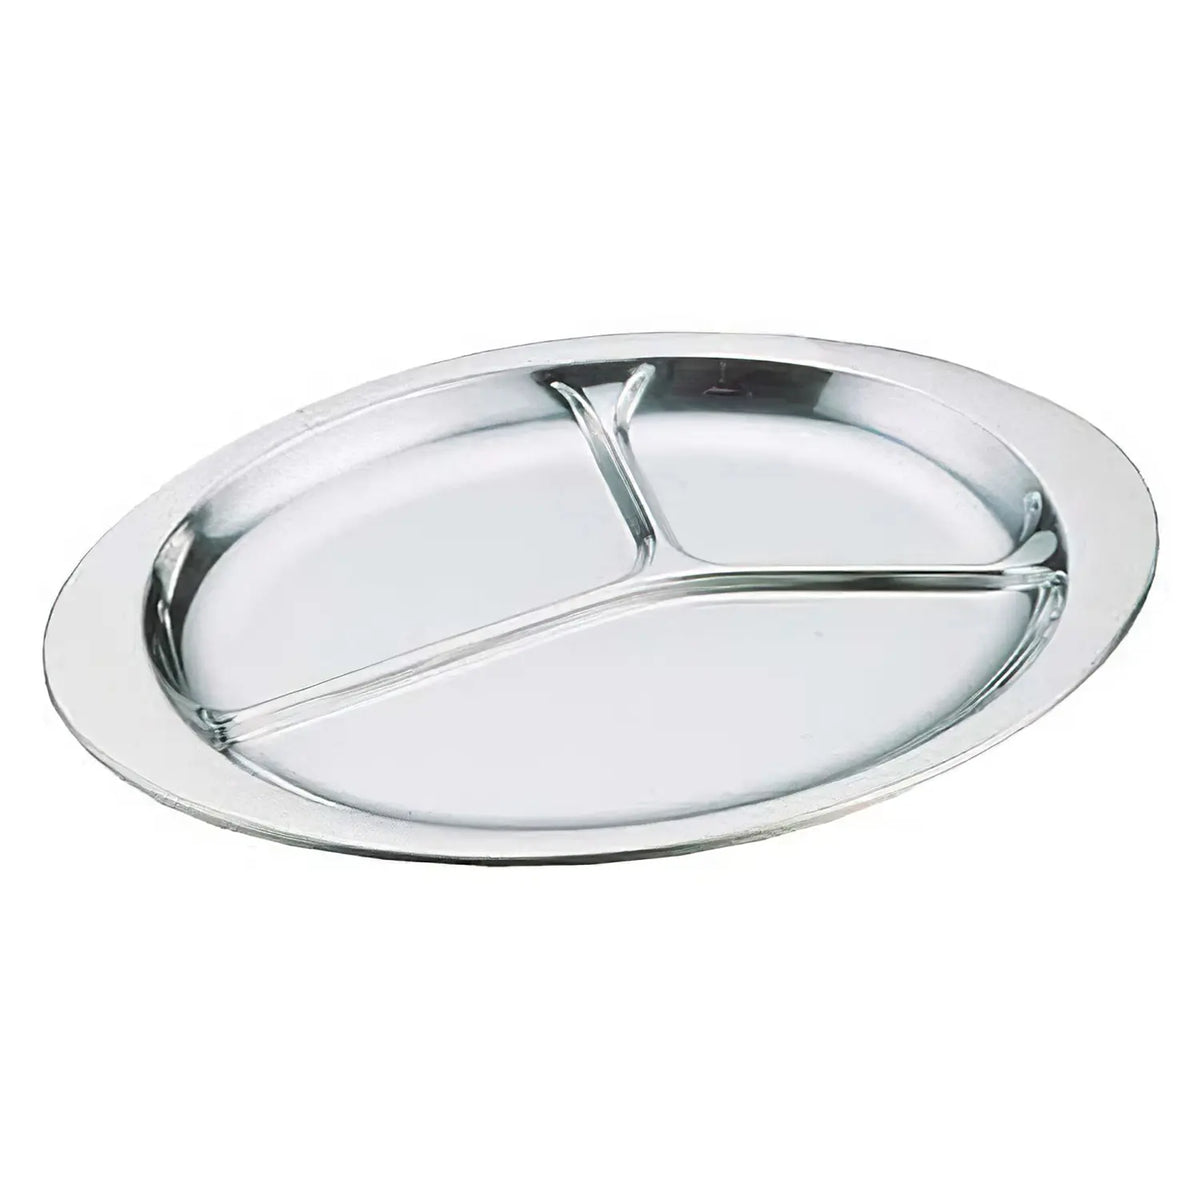 Ikeda Ecoclean Stainless Steel 3 Compartments Oval Lunch Plate